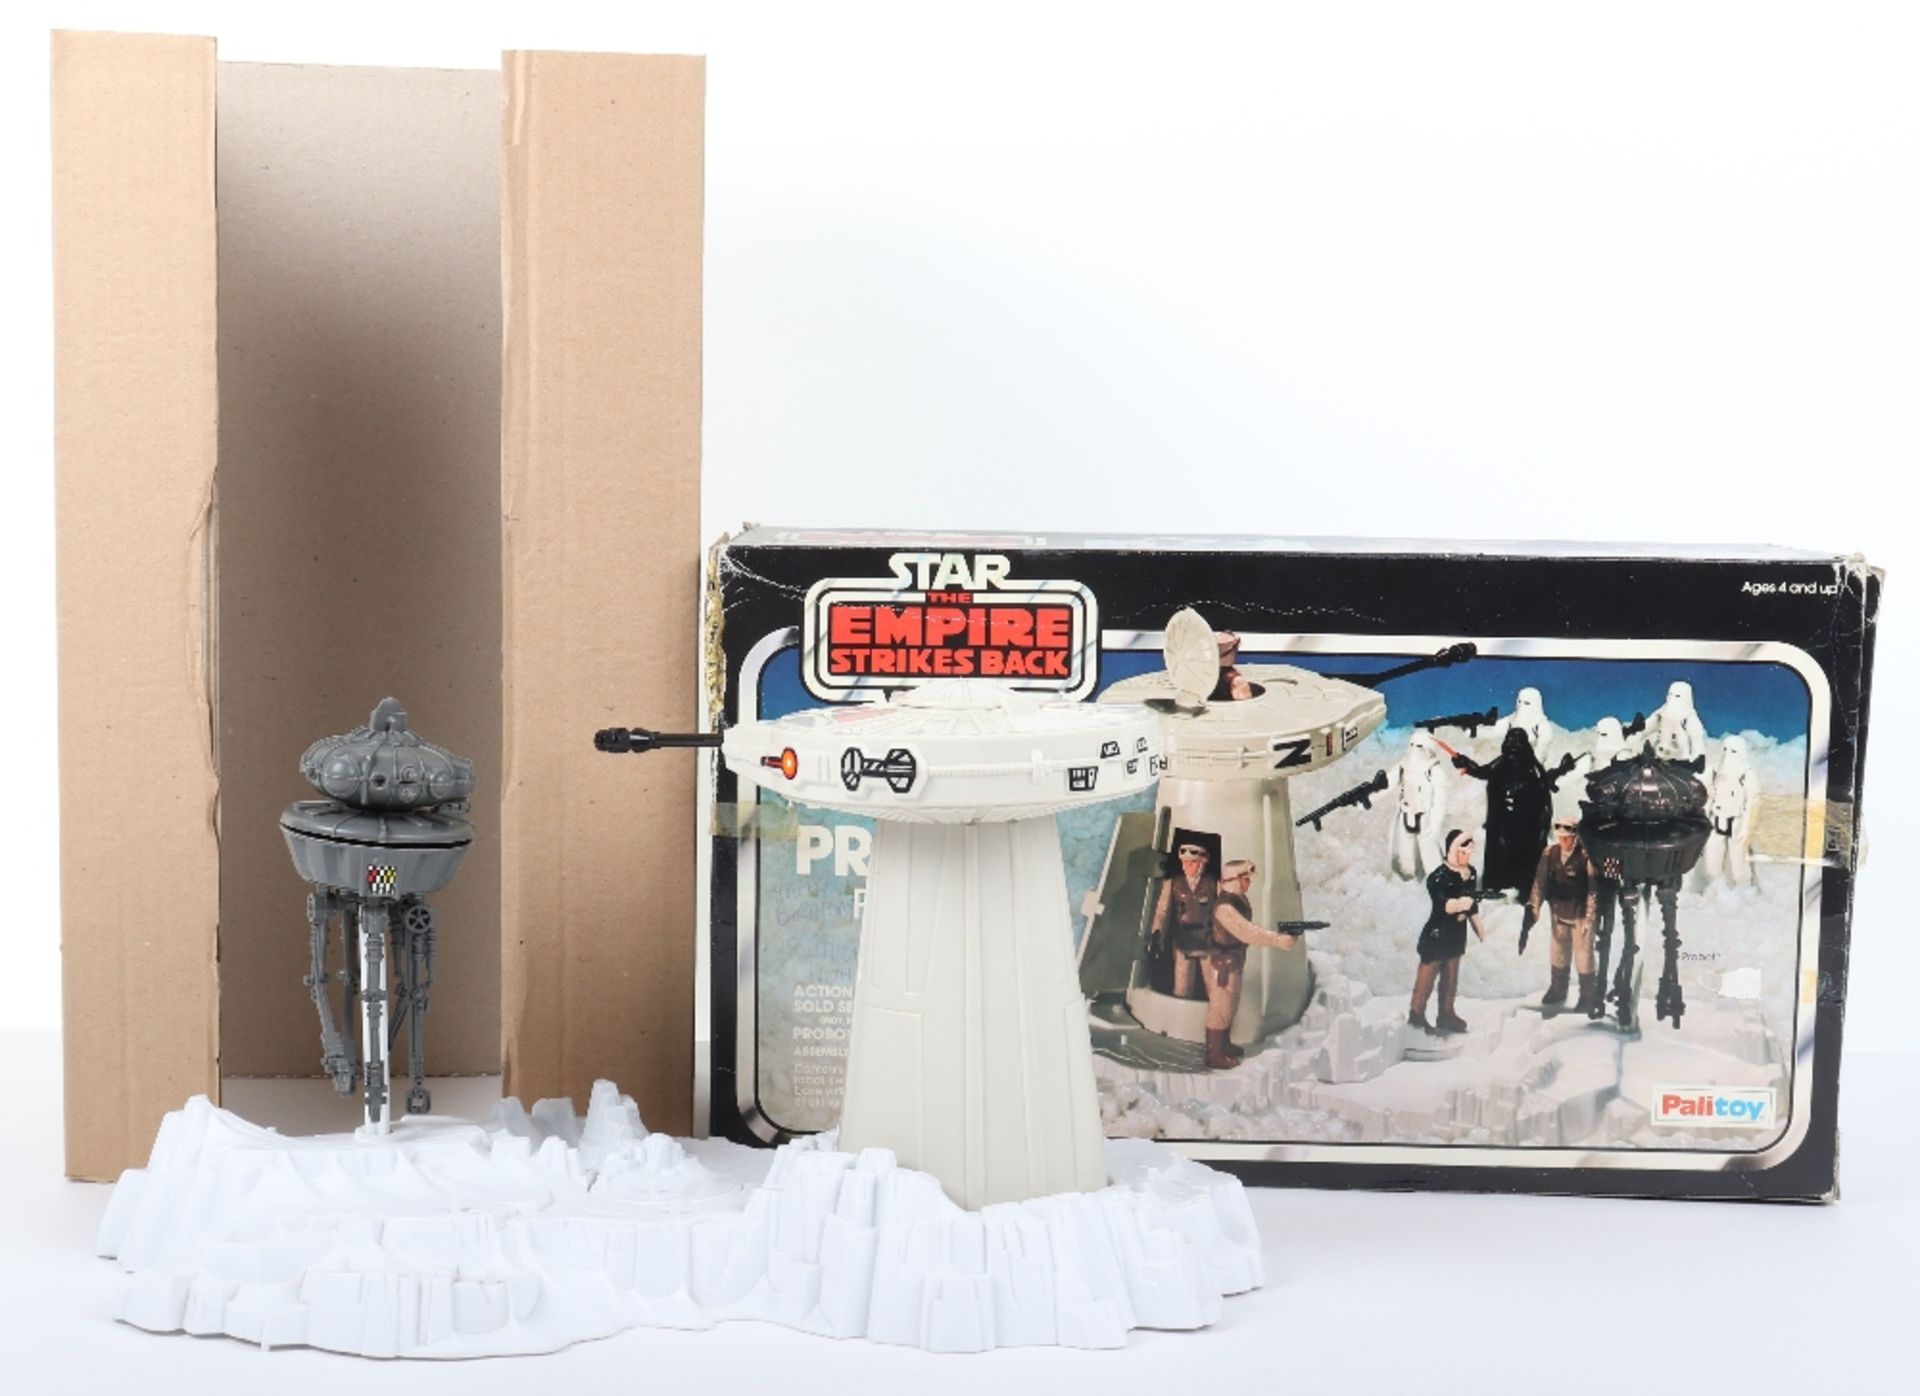 Boxed Palitoy Star Wars The Empire Strikes Back Turret & Probot Rebel Base Playset - Image 2 of 8